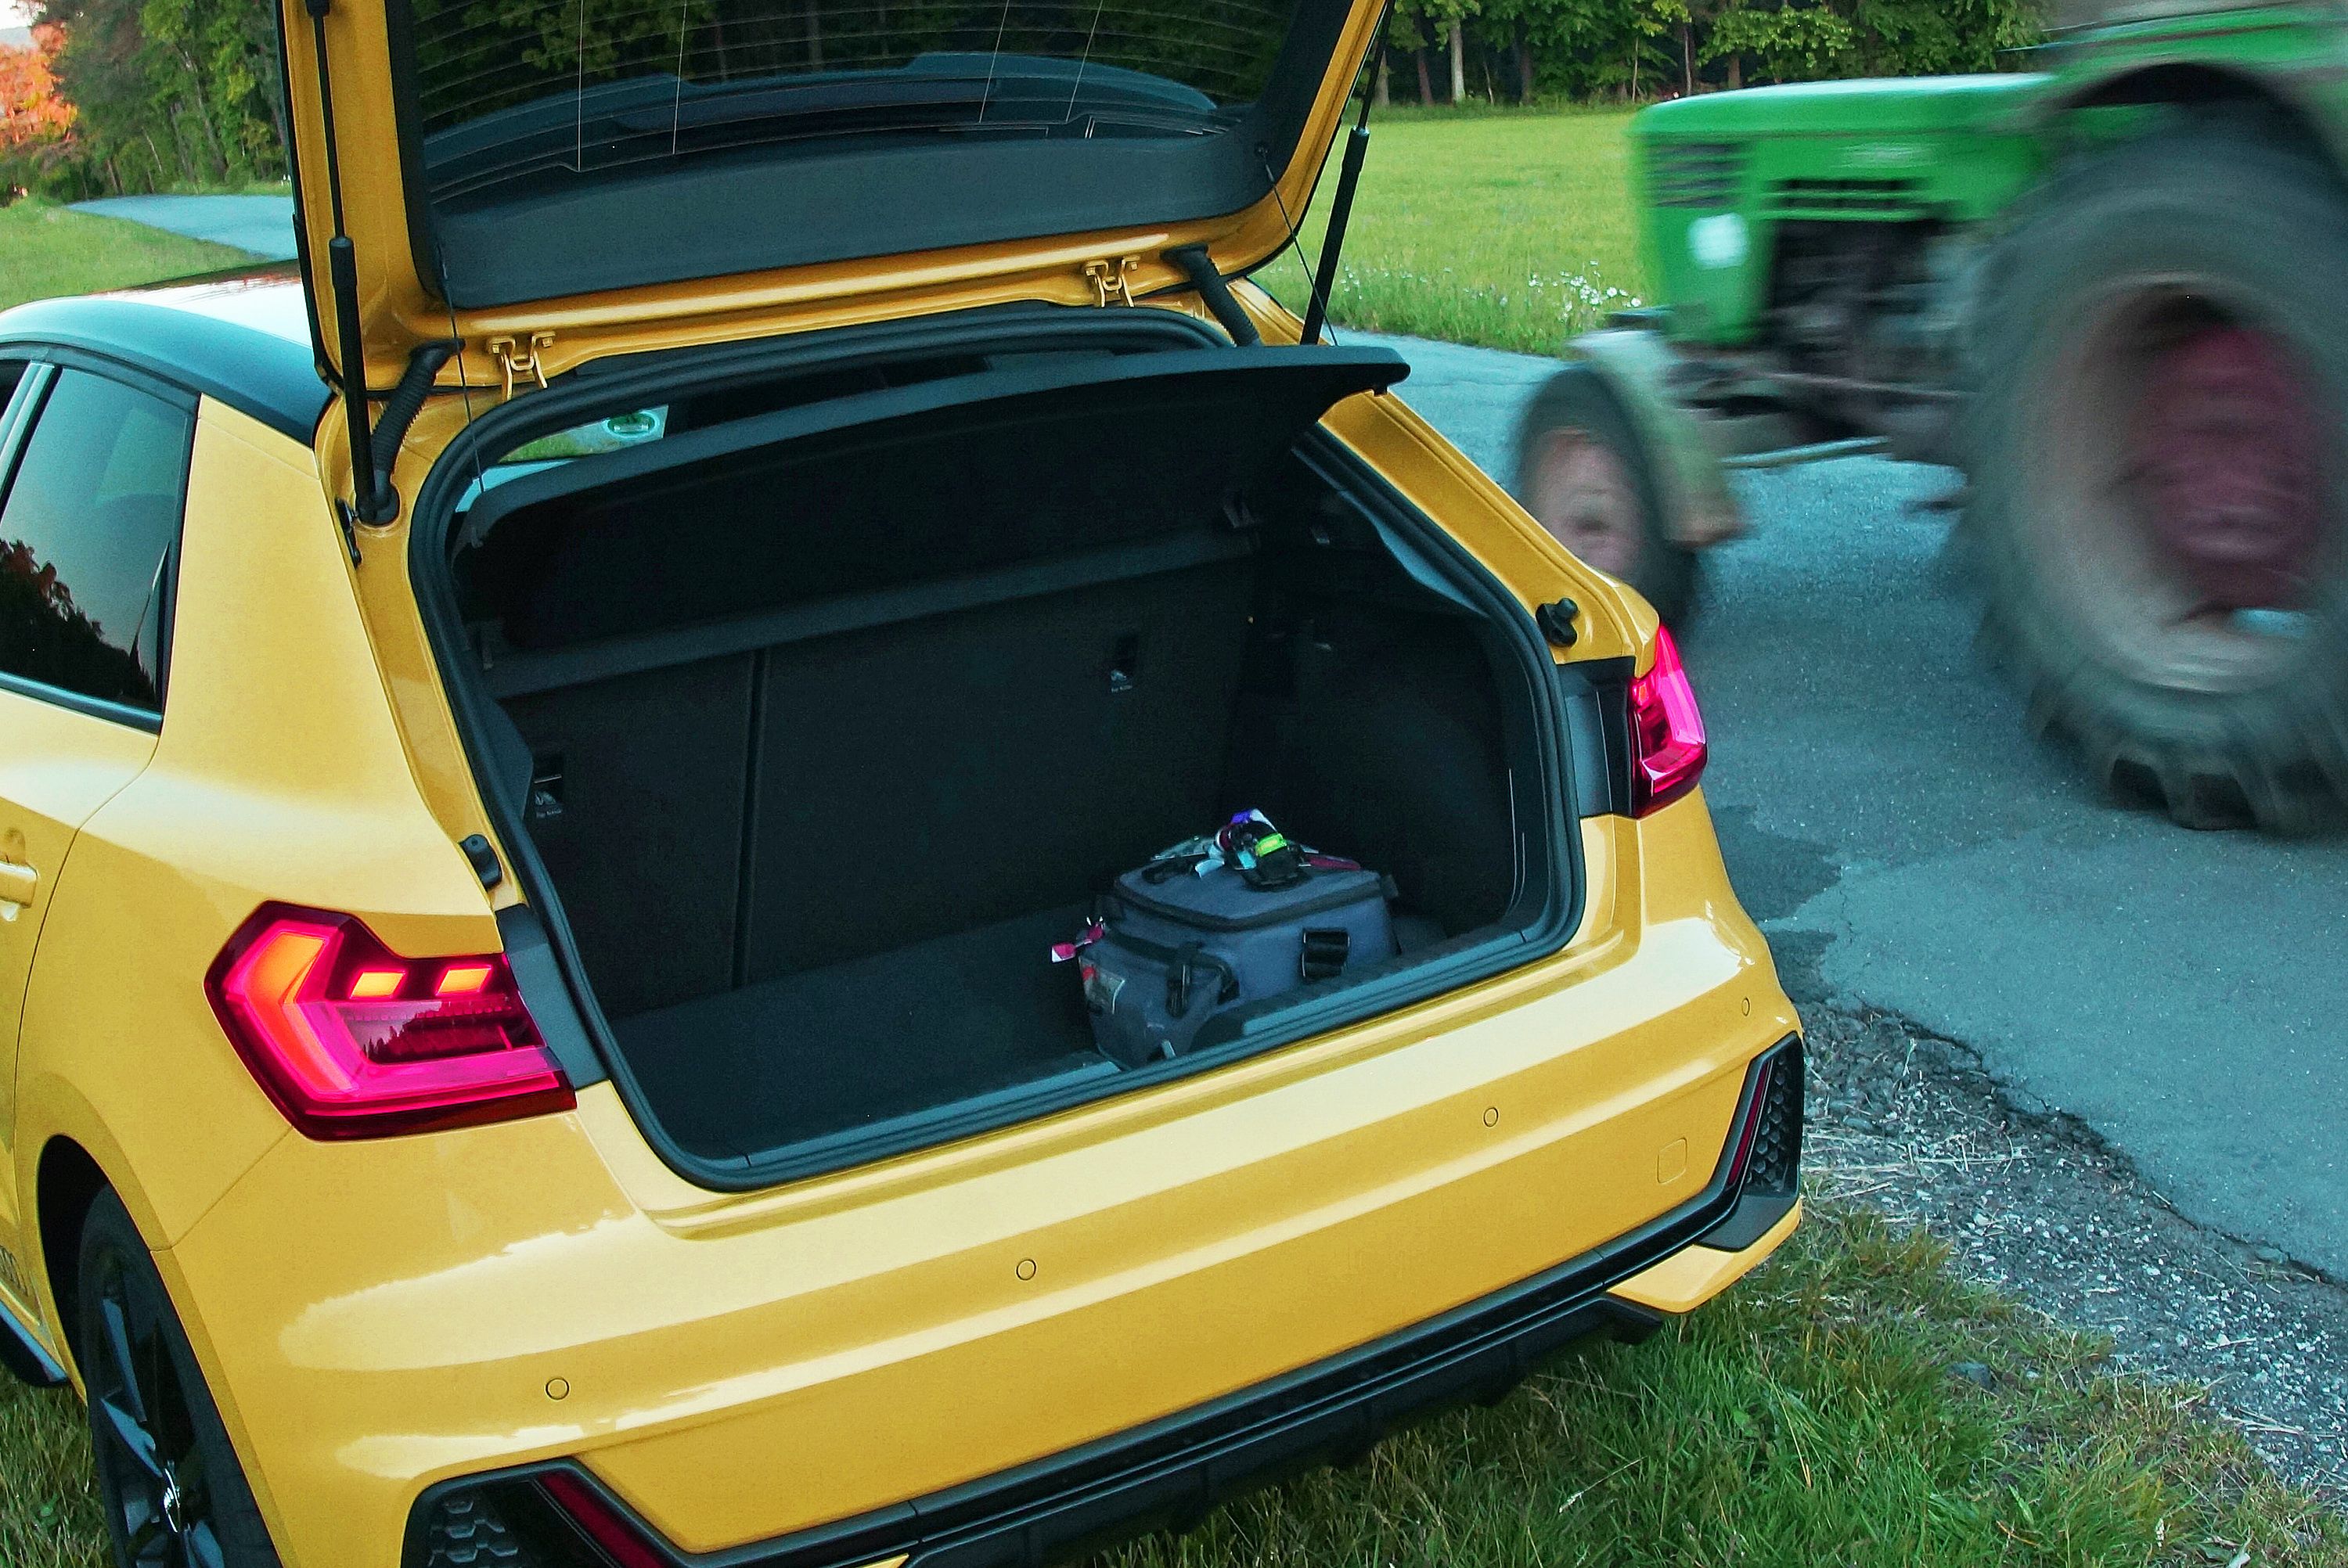 The 2020 Audi A1 Offers a Premium Experience in a Small Package